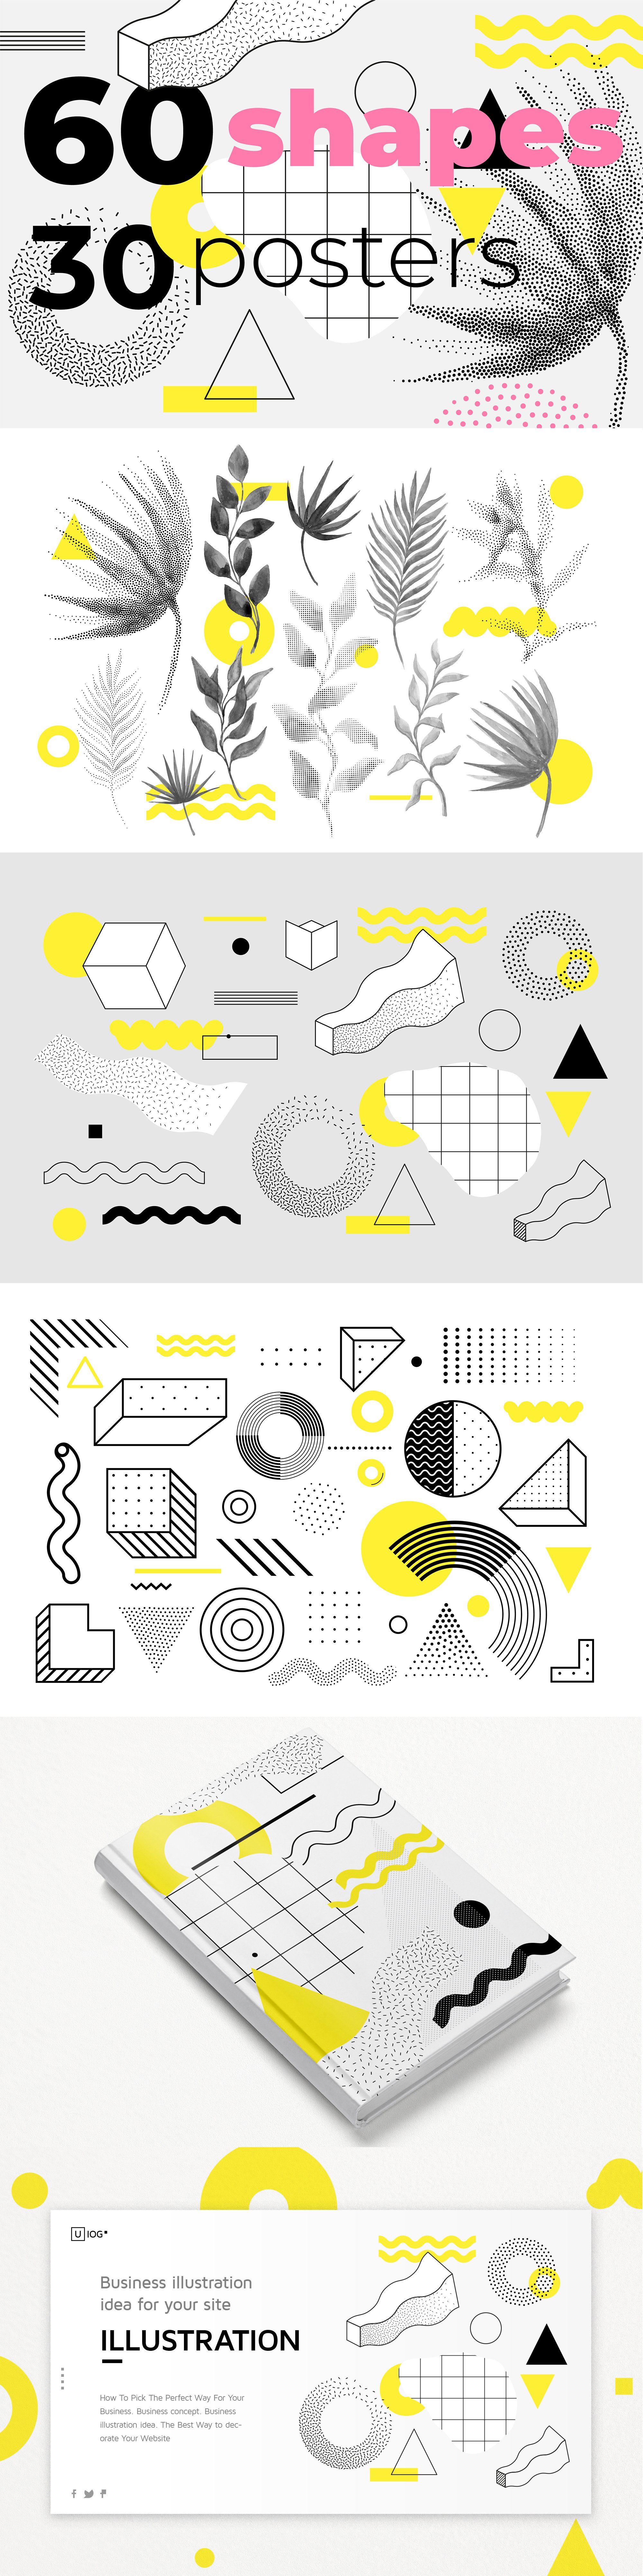 60 geometric shapes, 30 posters cover image.